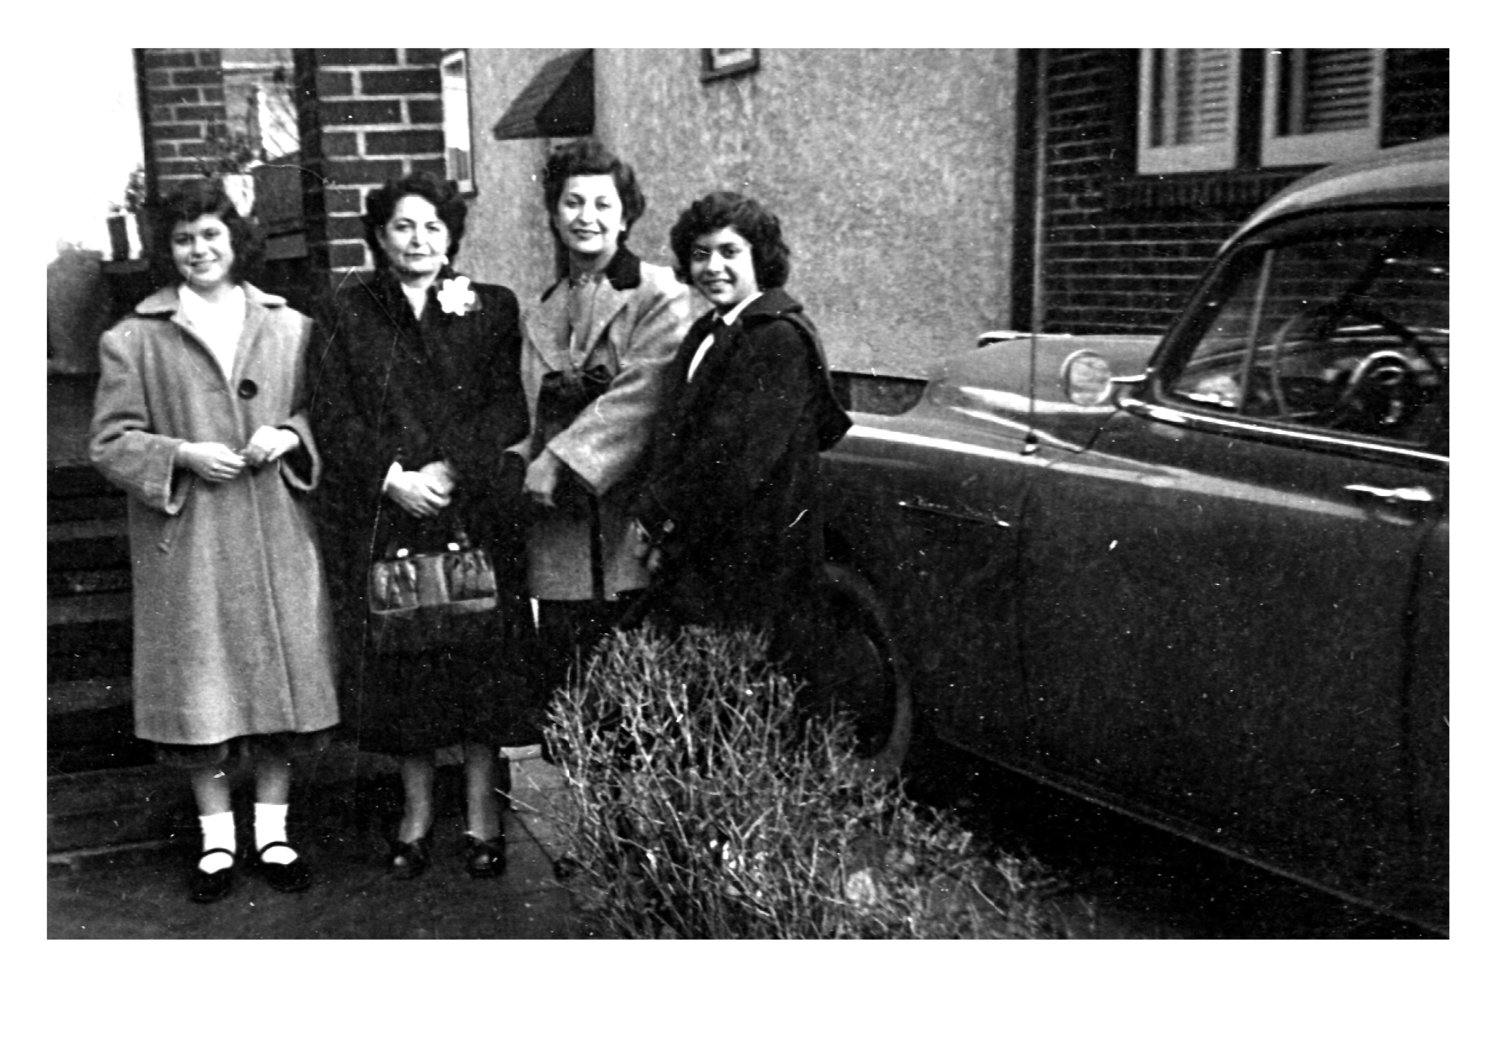 Three Generations in Brooklyn, 1949 - (from left to right) Annette (Jennifer's mom), Steta (great-grandmother), Fritzie (grandmother), and Essie (aunt).